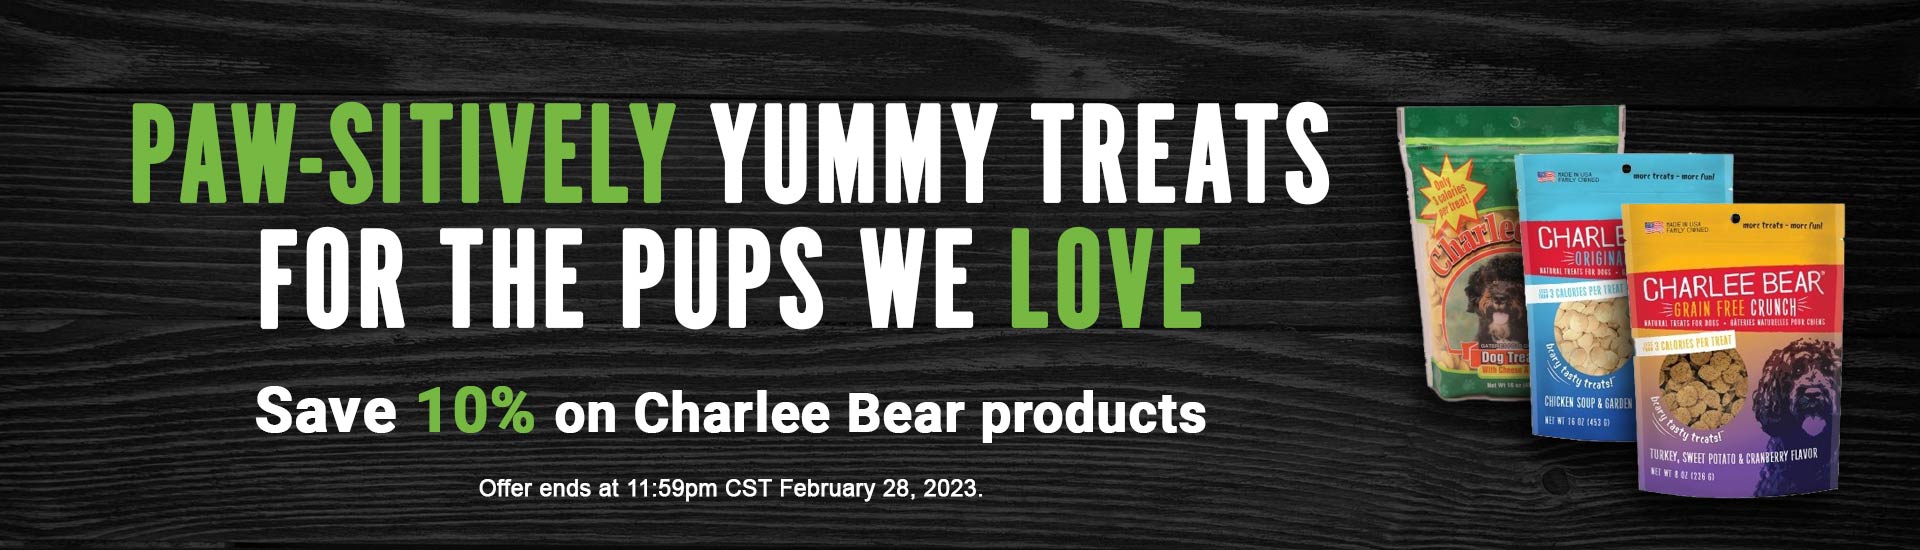 Paw-sitively yummy treats for the pups we love. Save 10% on Charlee Bear products. Offer ends at 11:59pm CST February 28, 2023.